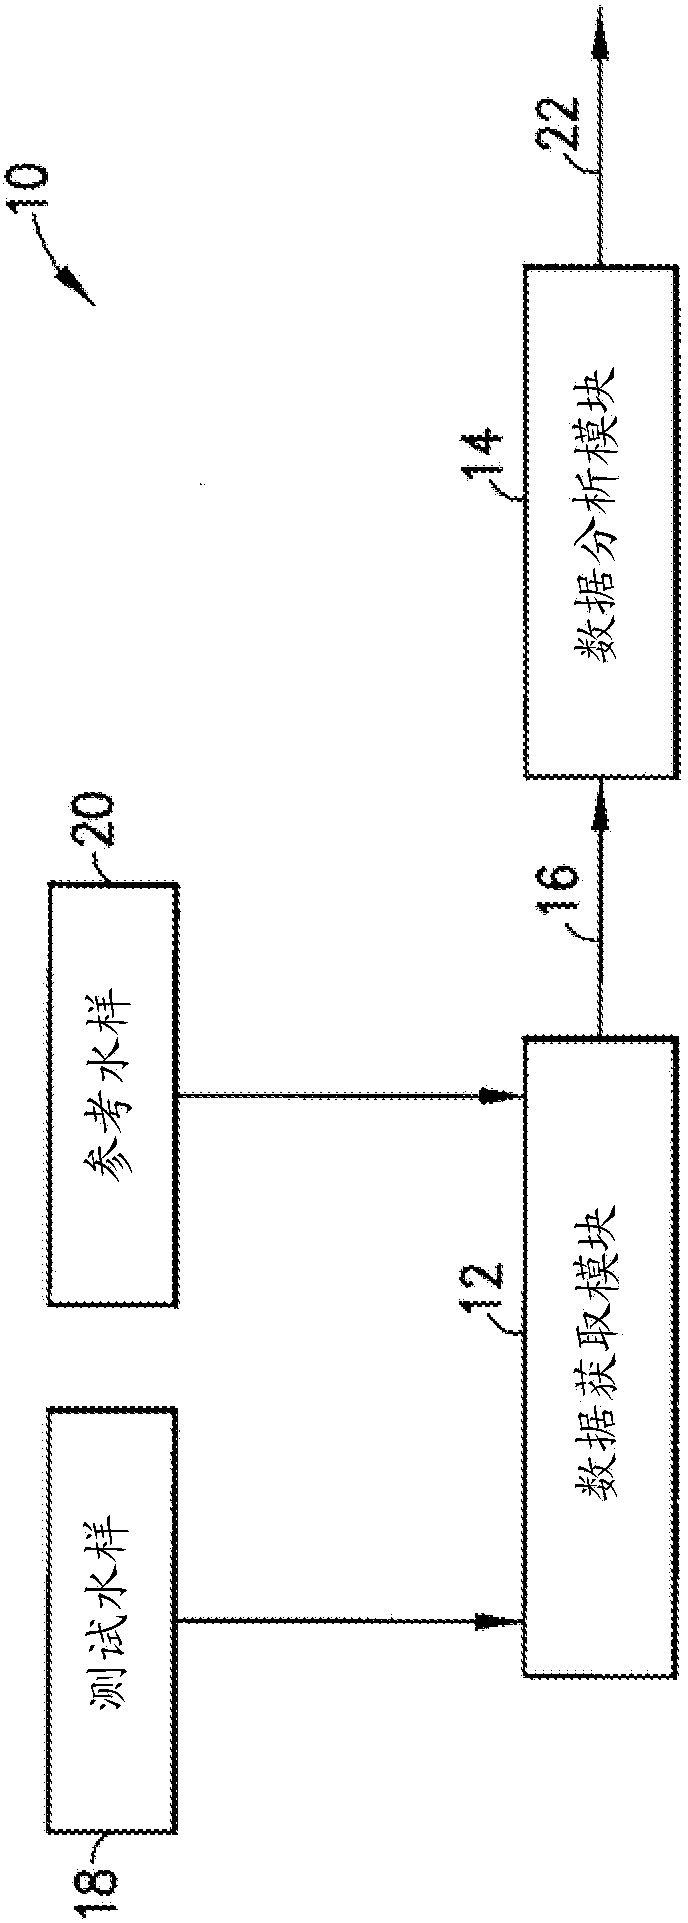 Systems and methods for assay of bio-contaminants in water